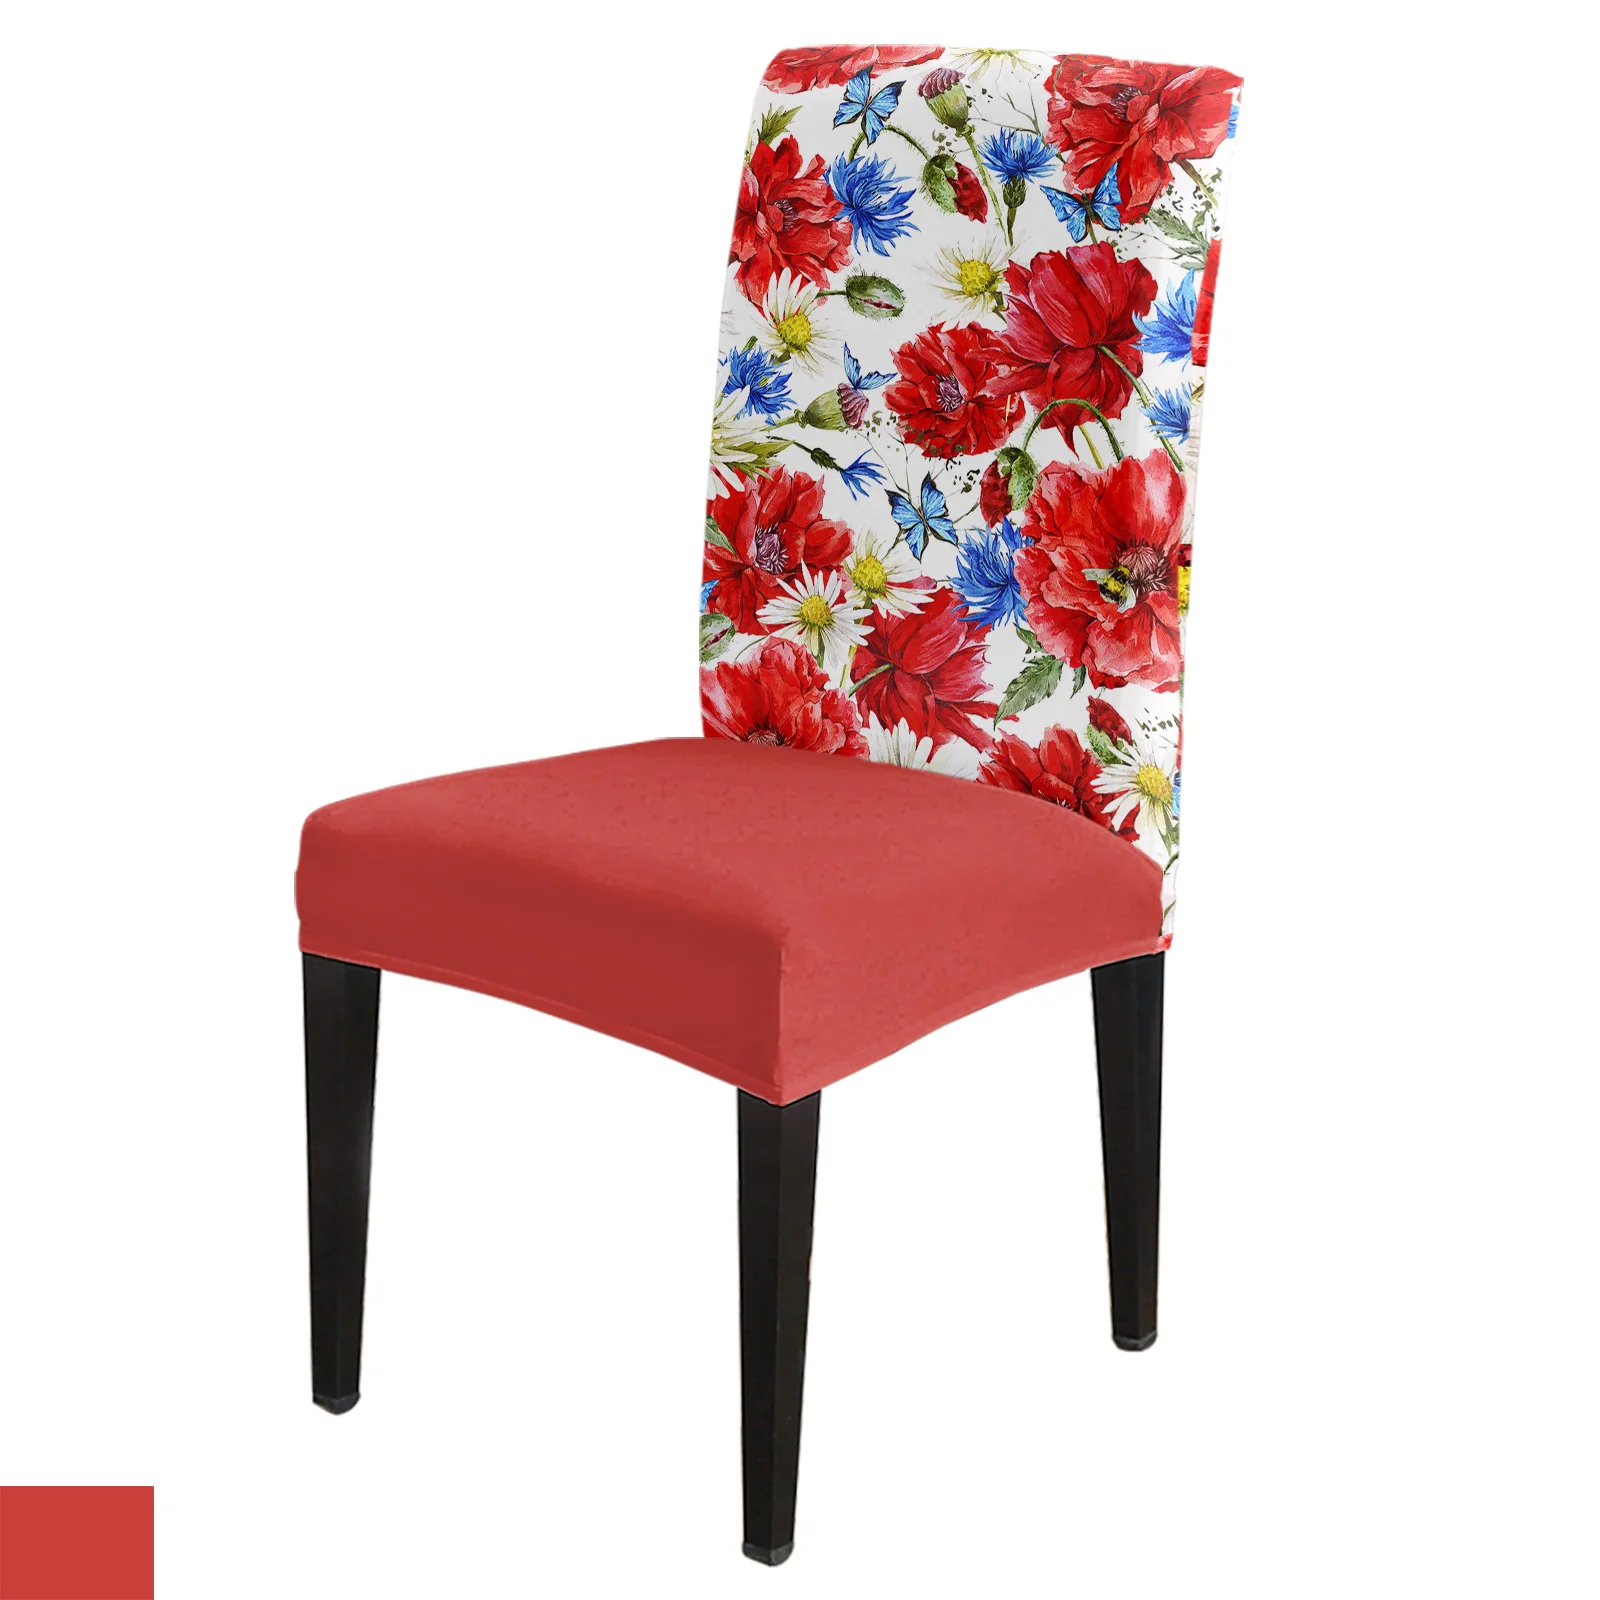 

Red Poppy Daisy Flower Dining Chair Cover 4/6/8PCS Spandex Elastic Chair Slipcover Case for Wedding Hotel Banquet Dining Room